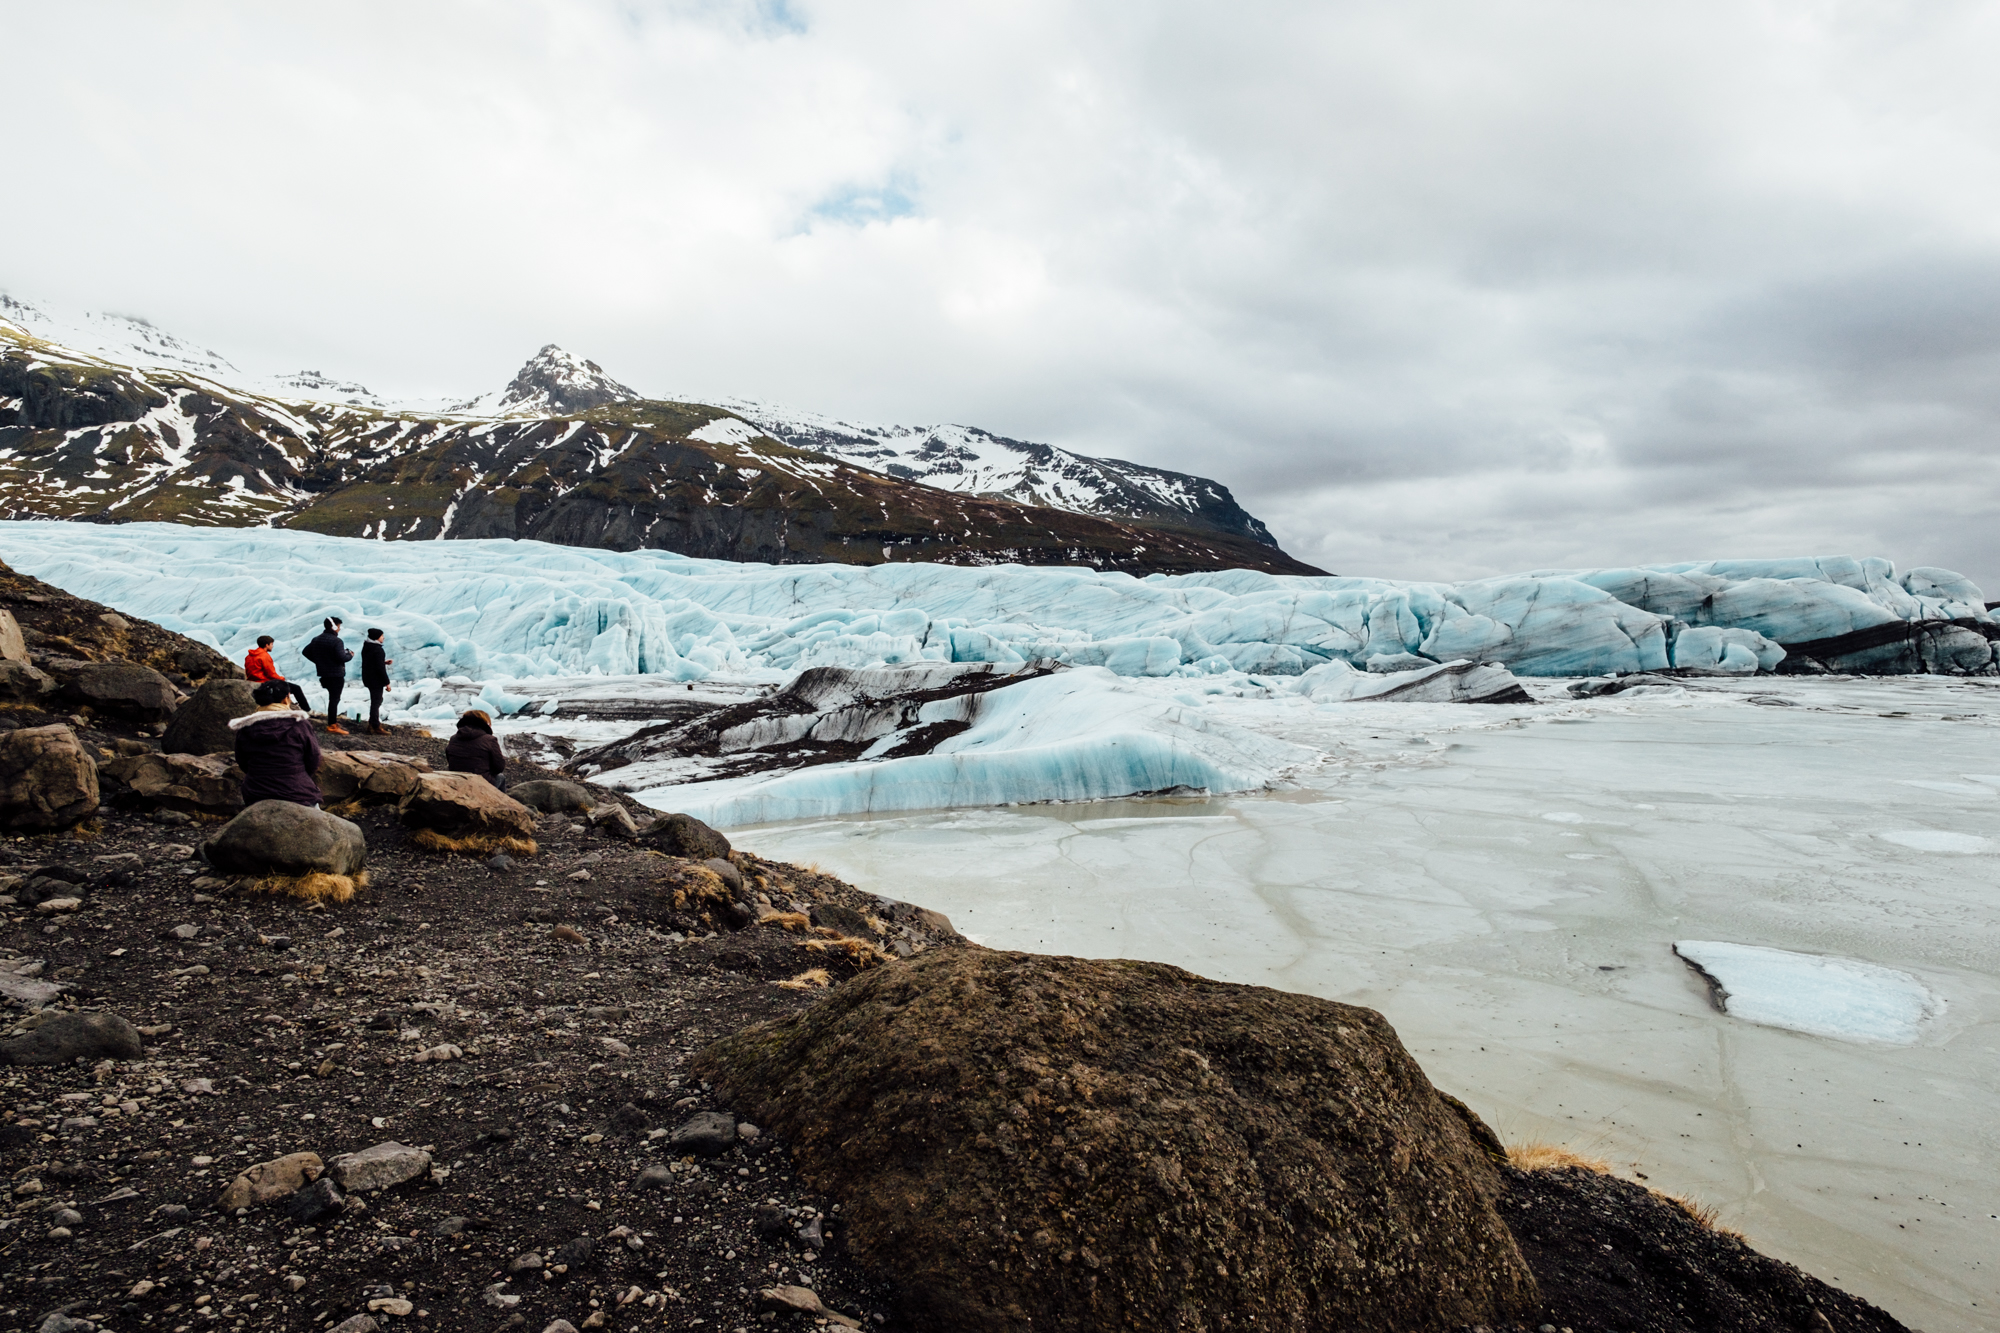  Enjoying the views at Svinafellsjökull with a few other tourists. While it was a bit cold in March, we are so glad we went before summer, because the landmarks weren’t nearly as crowded as we expected. There were many times on the trip that we were 